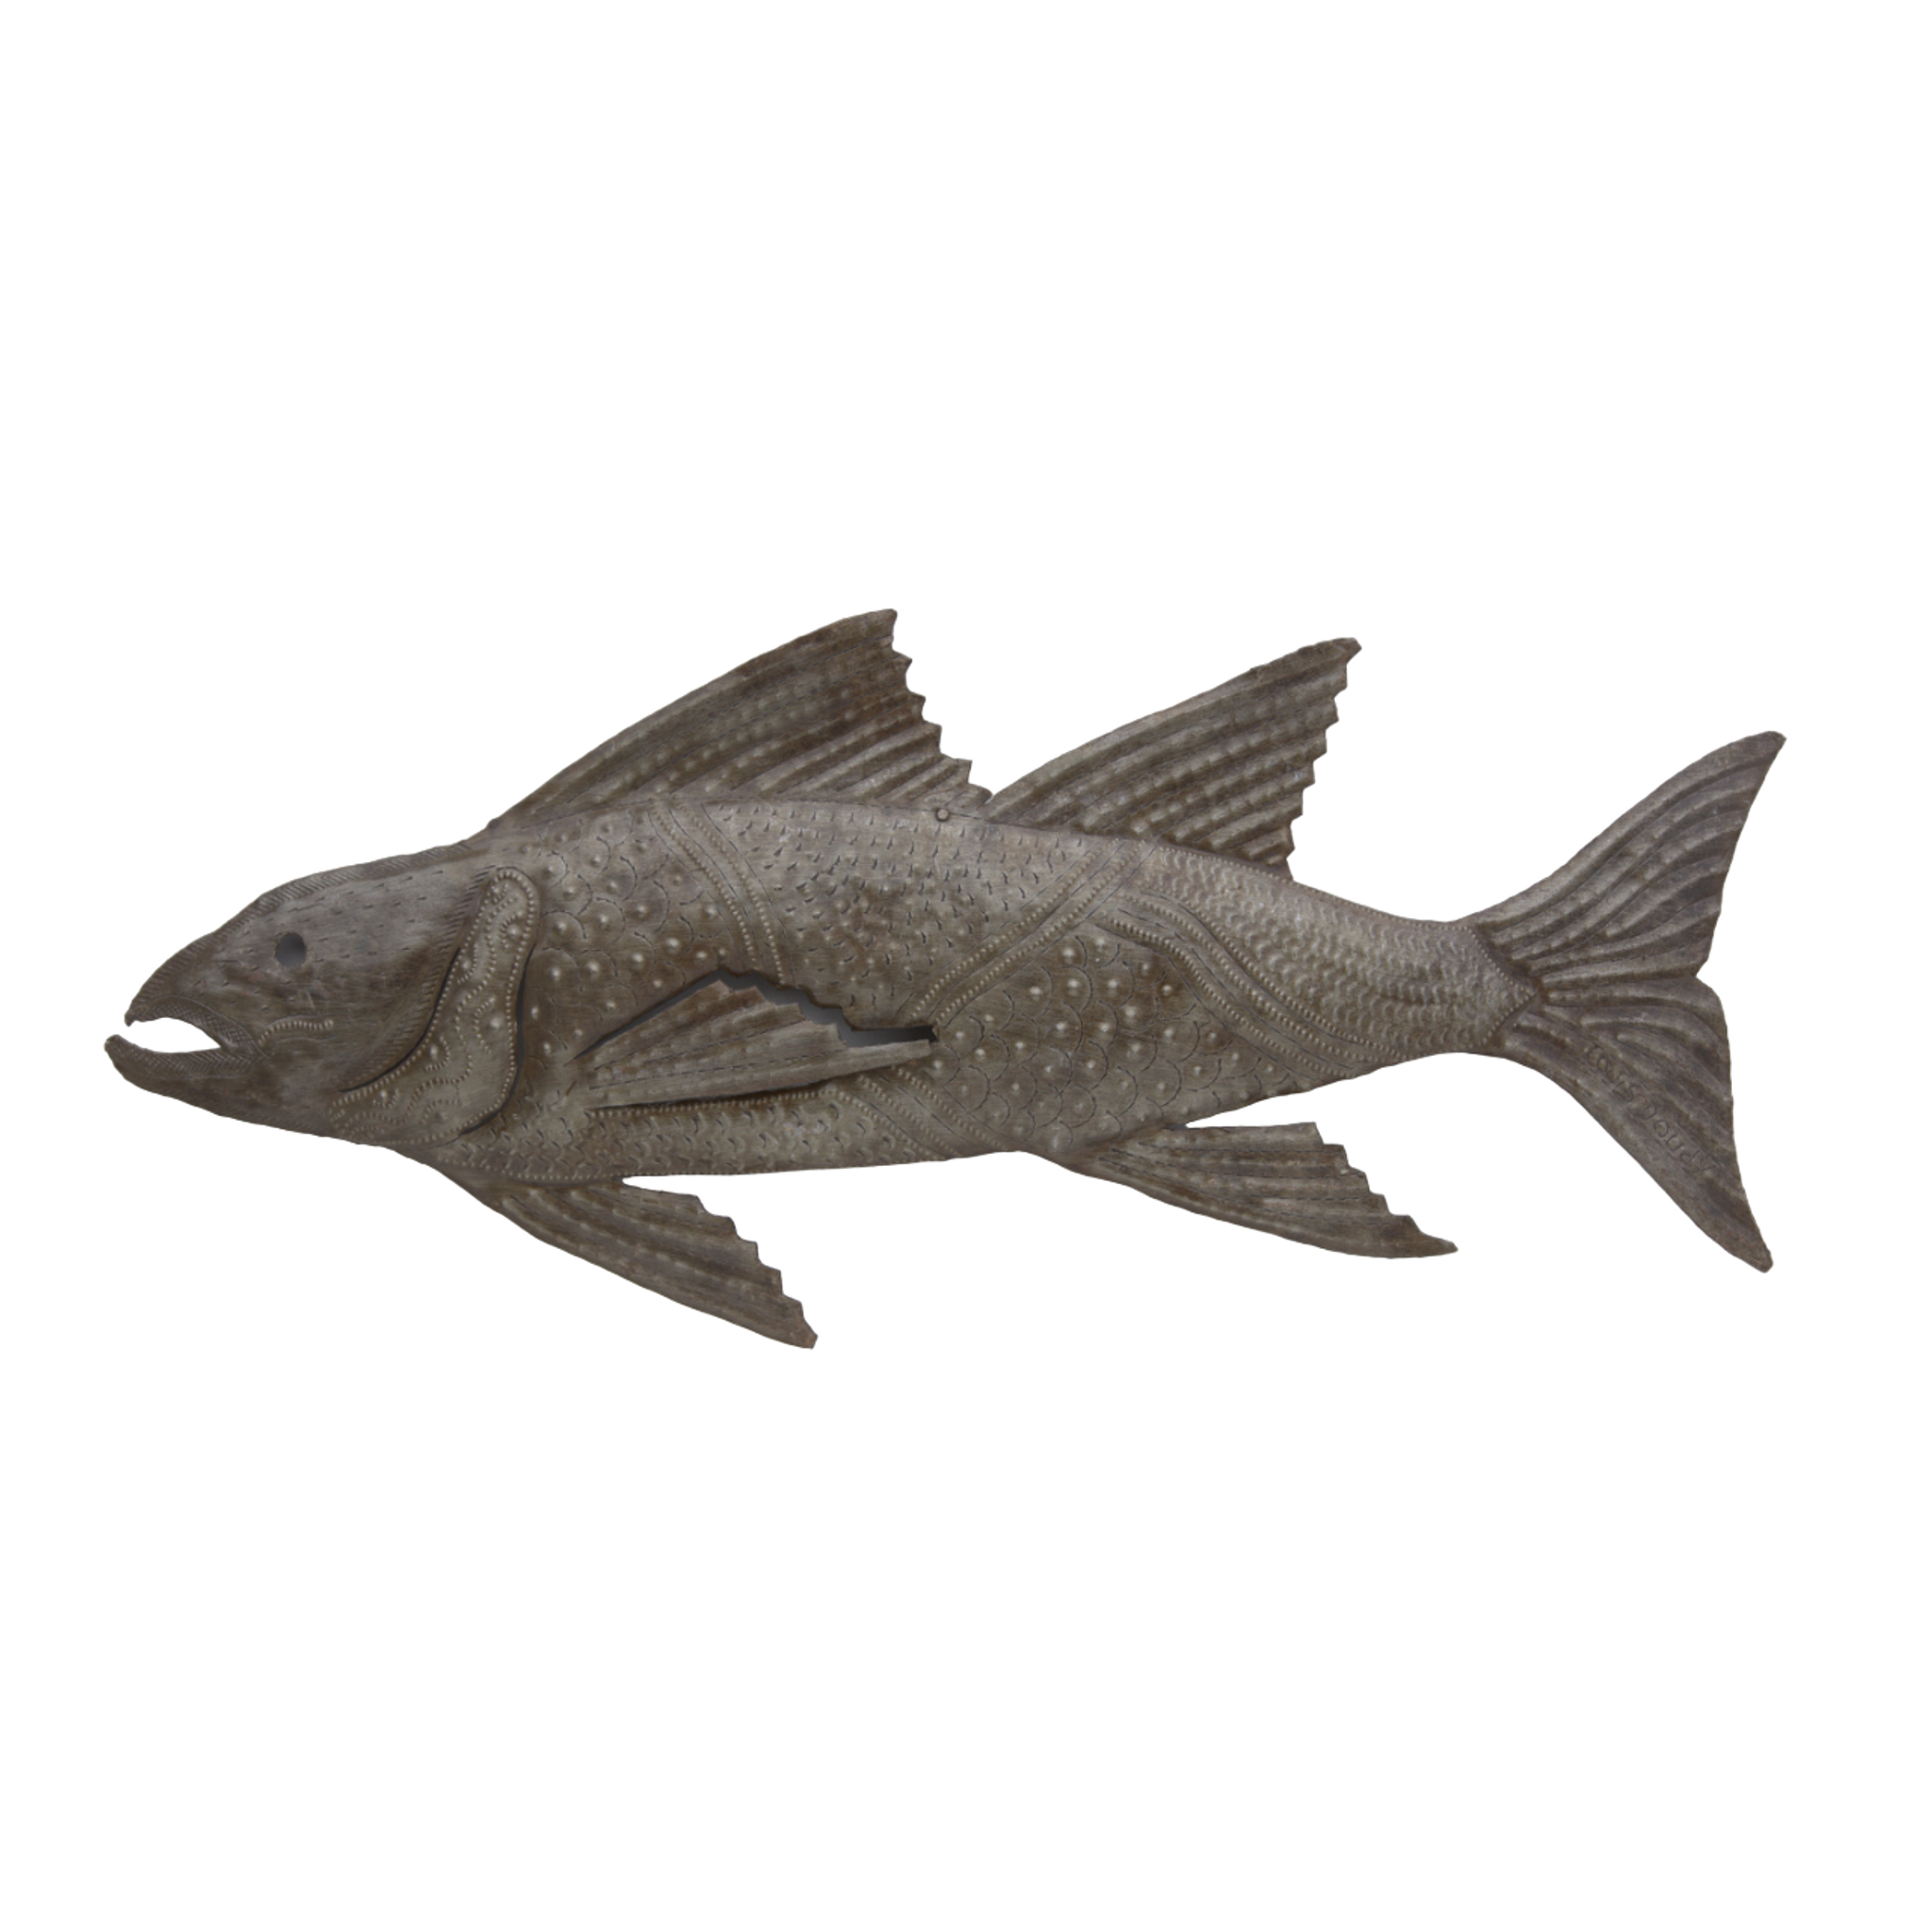 https://cdn11.bigcommerce.com/s-c8h5g/images/stencil/2048x2048/products/14453/58109/OAK5316_Fish_Swimming_Left_with_Open_Mouth_Handrafted_Haitian_Metal_Art__14315.1700685151.png?c=2